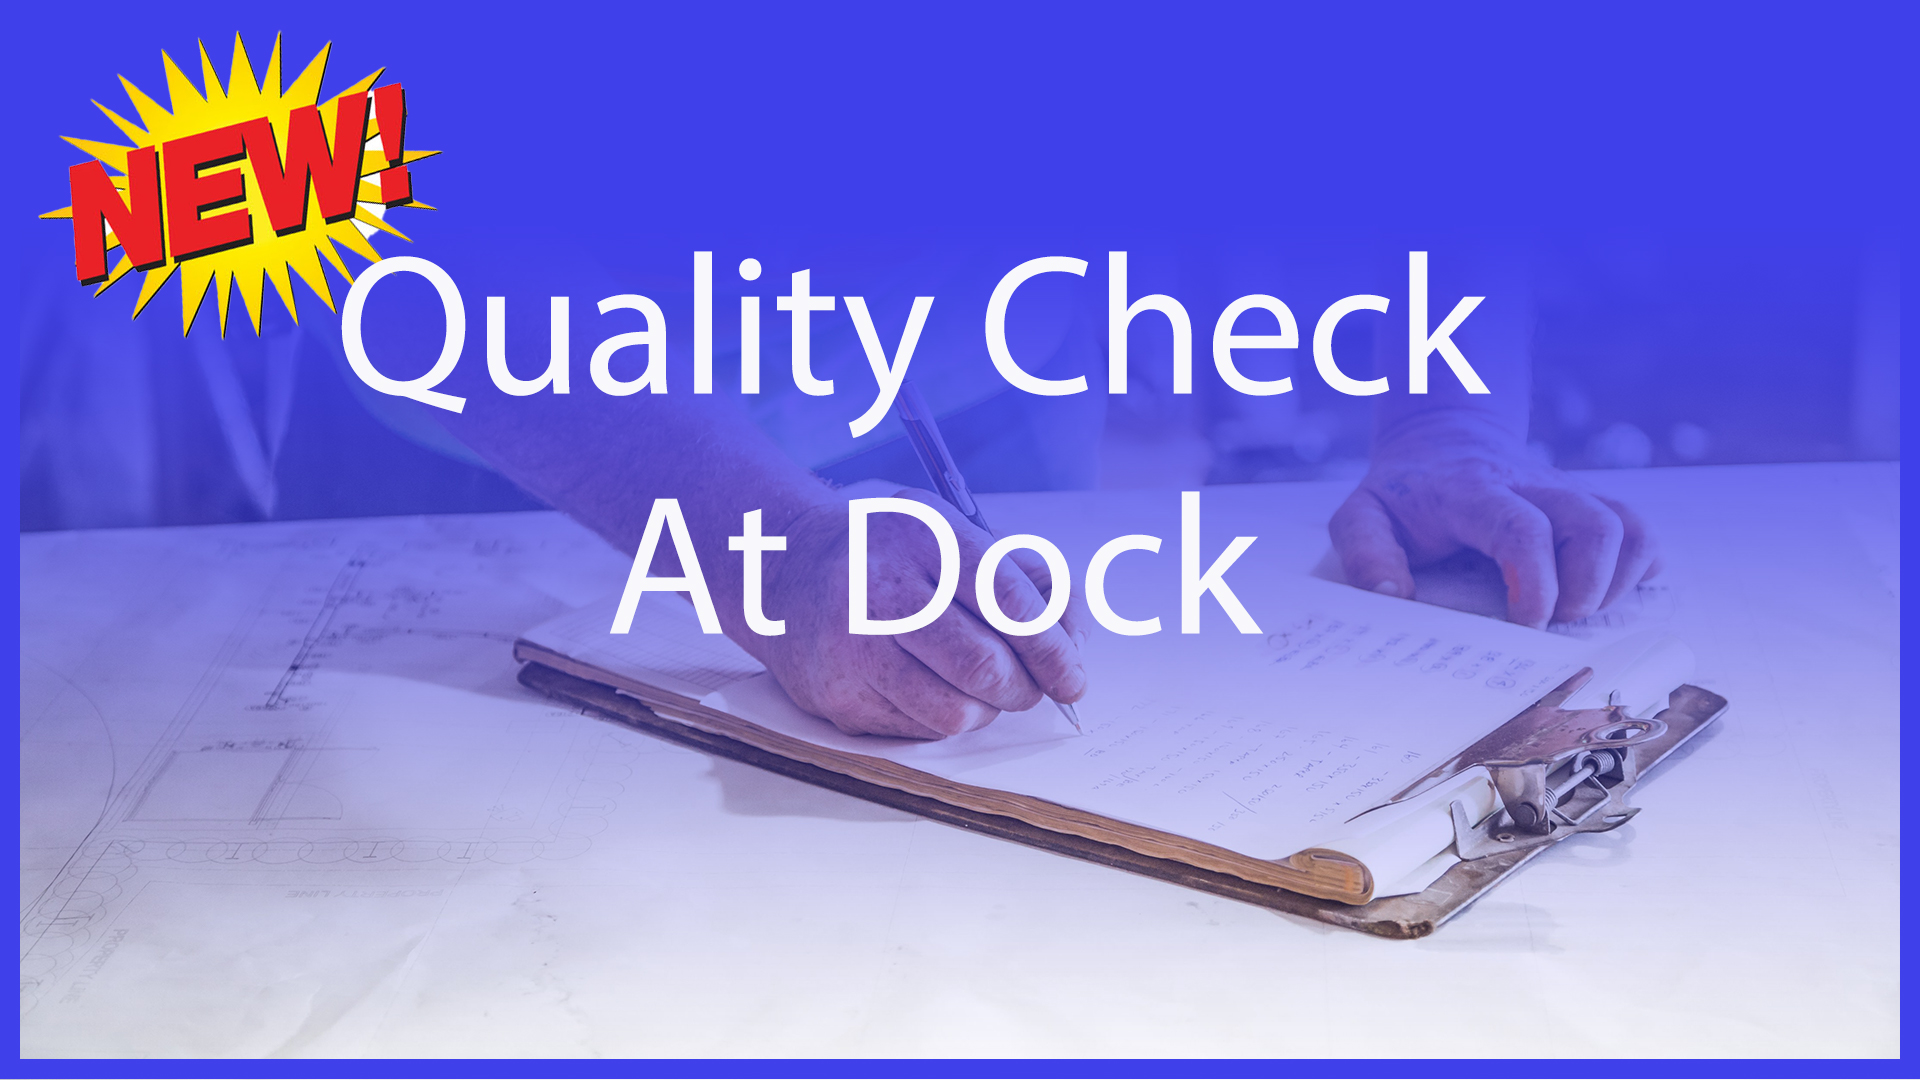 You are currently viewing Dynamics 365 Advanced Warehouse Quality Check at the Dock